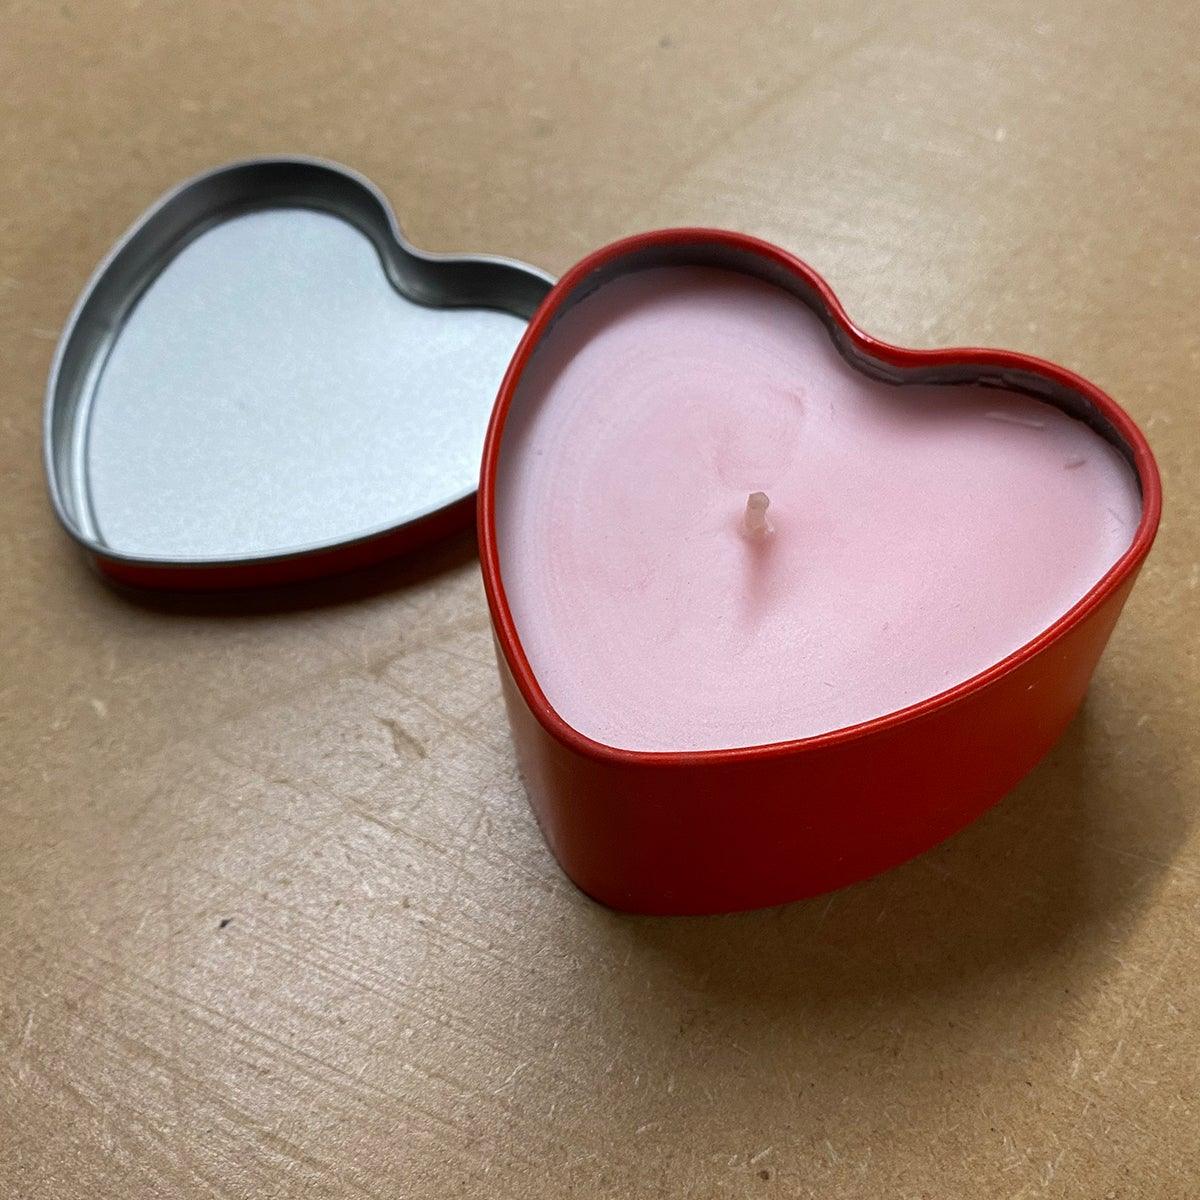 Merry Christmas Heart Tin Red Heart Shaped Tins With Scented Rose Candle for him or her - shopquality4u